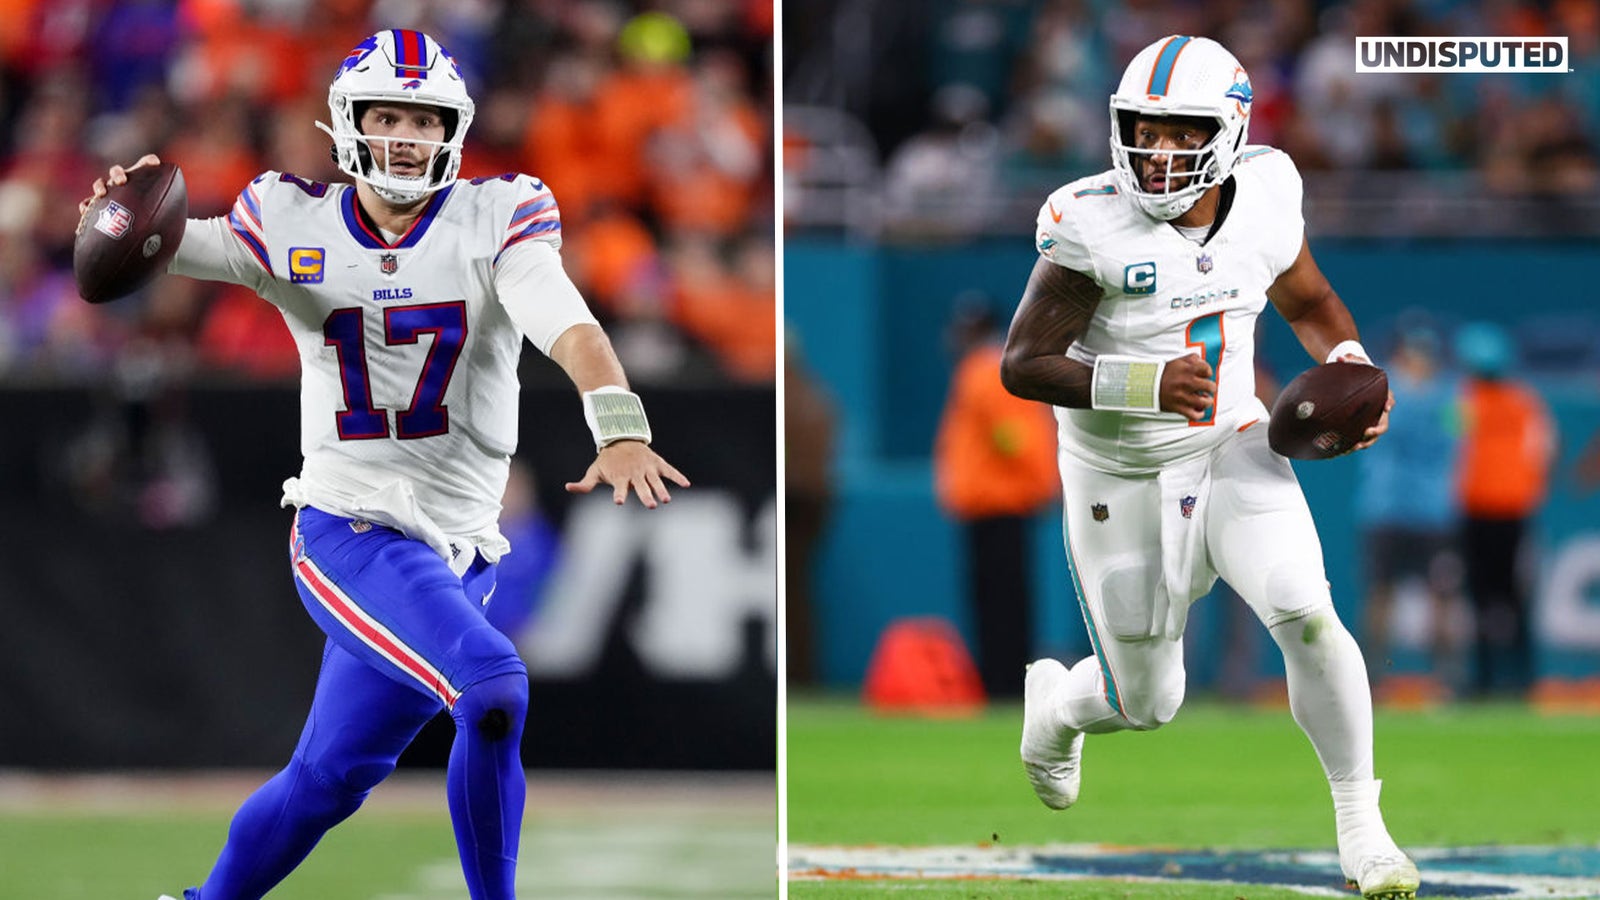 Bills clinch AFC East and No. 2 seed, Dolphins fall to No. 6 seed in playoffs 